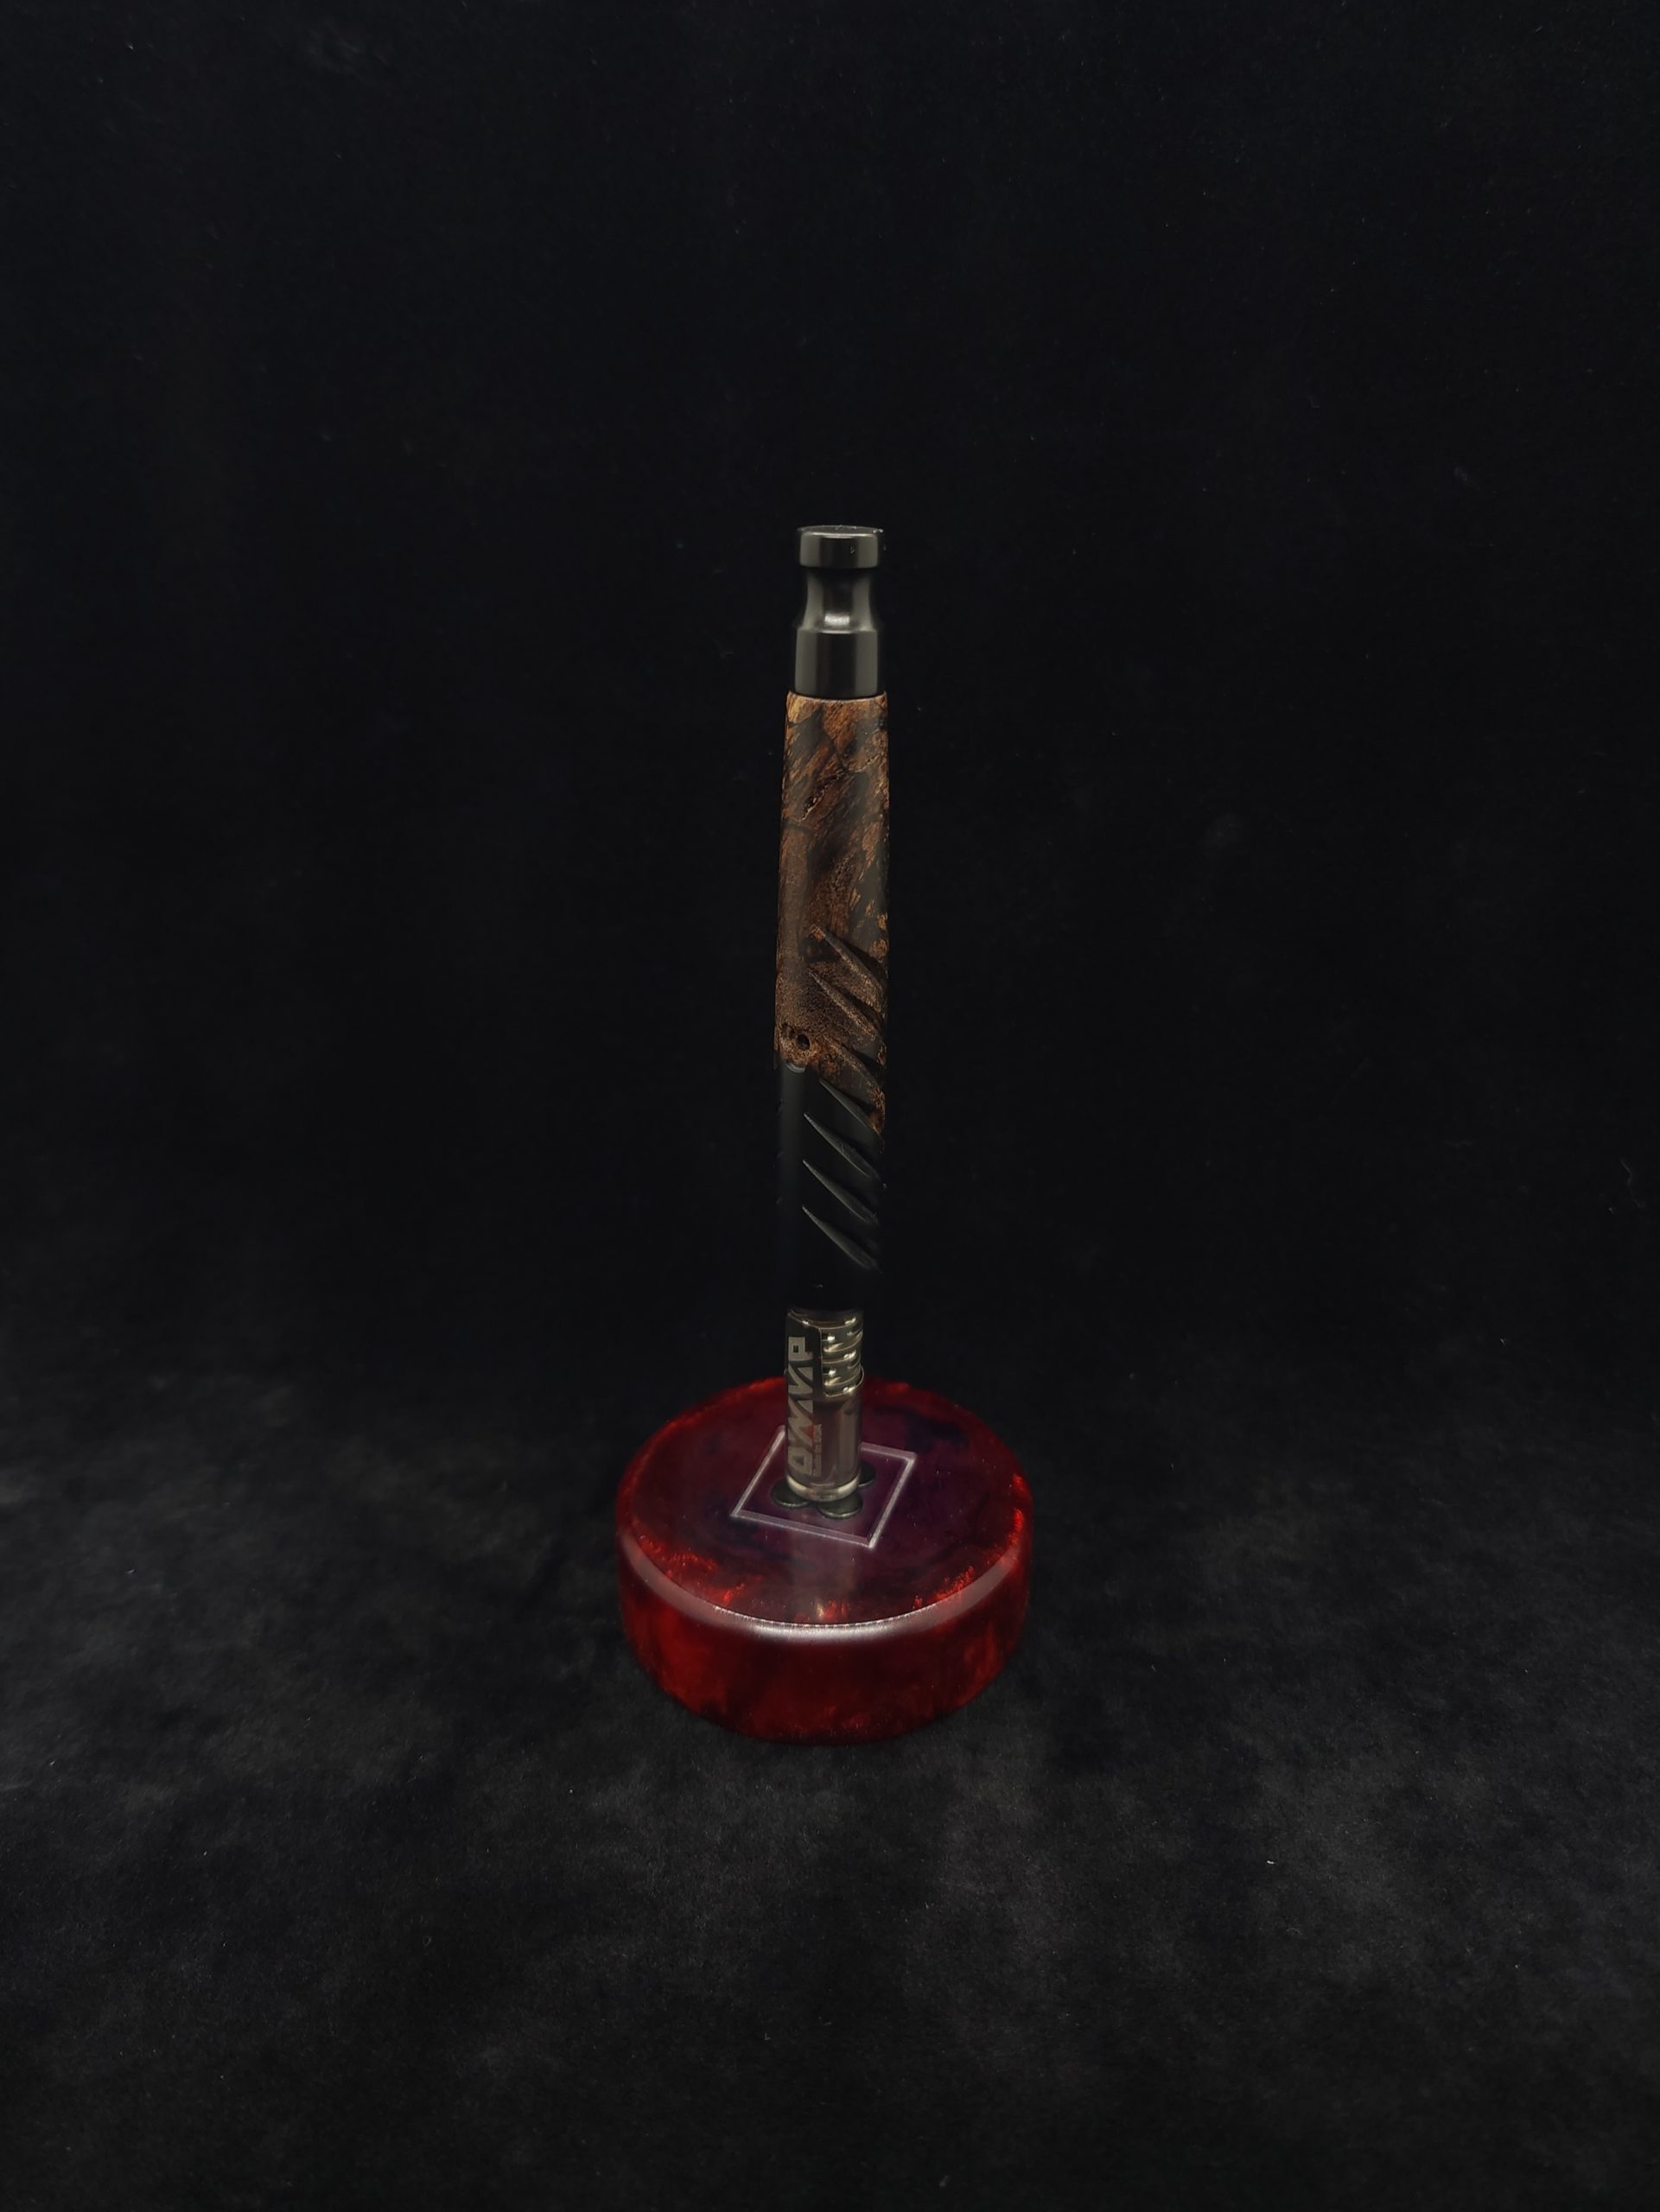 This image portrays Reaper XL Dynavap Stem/Burl Wood Hybrid+Black Matching Mouthpiece by Dovetail Woodwork.